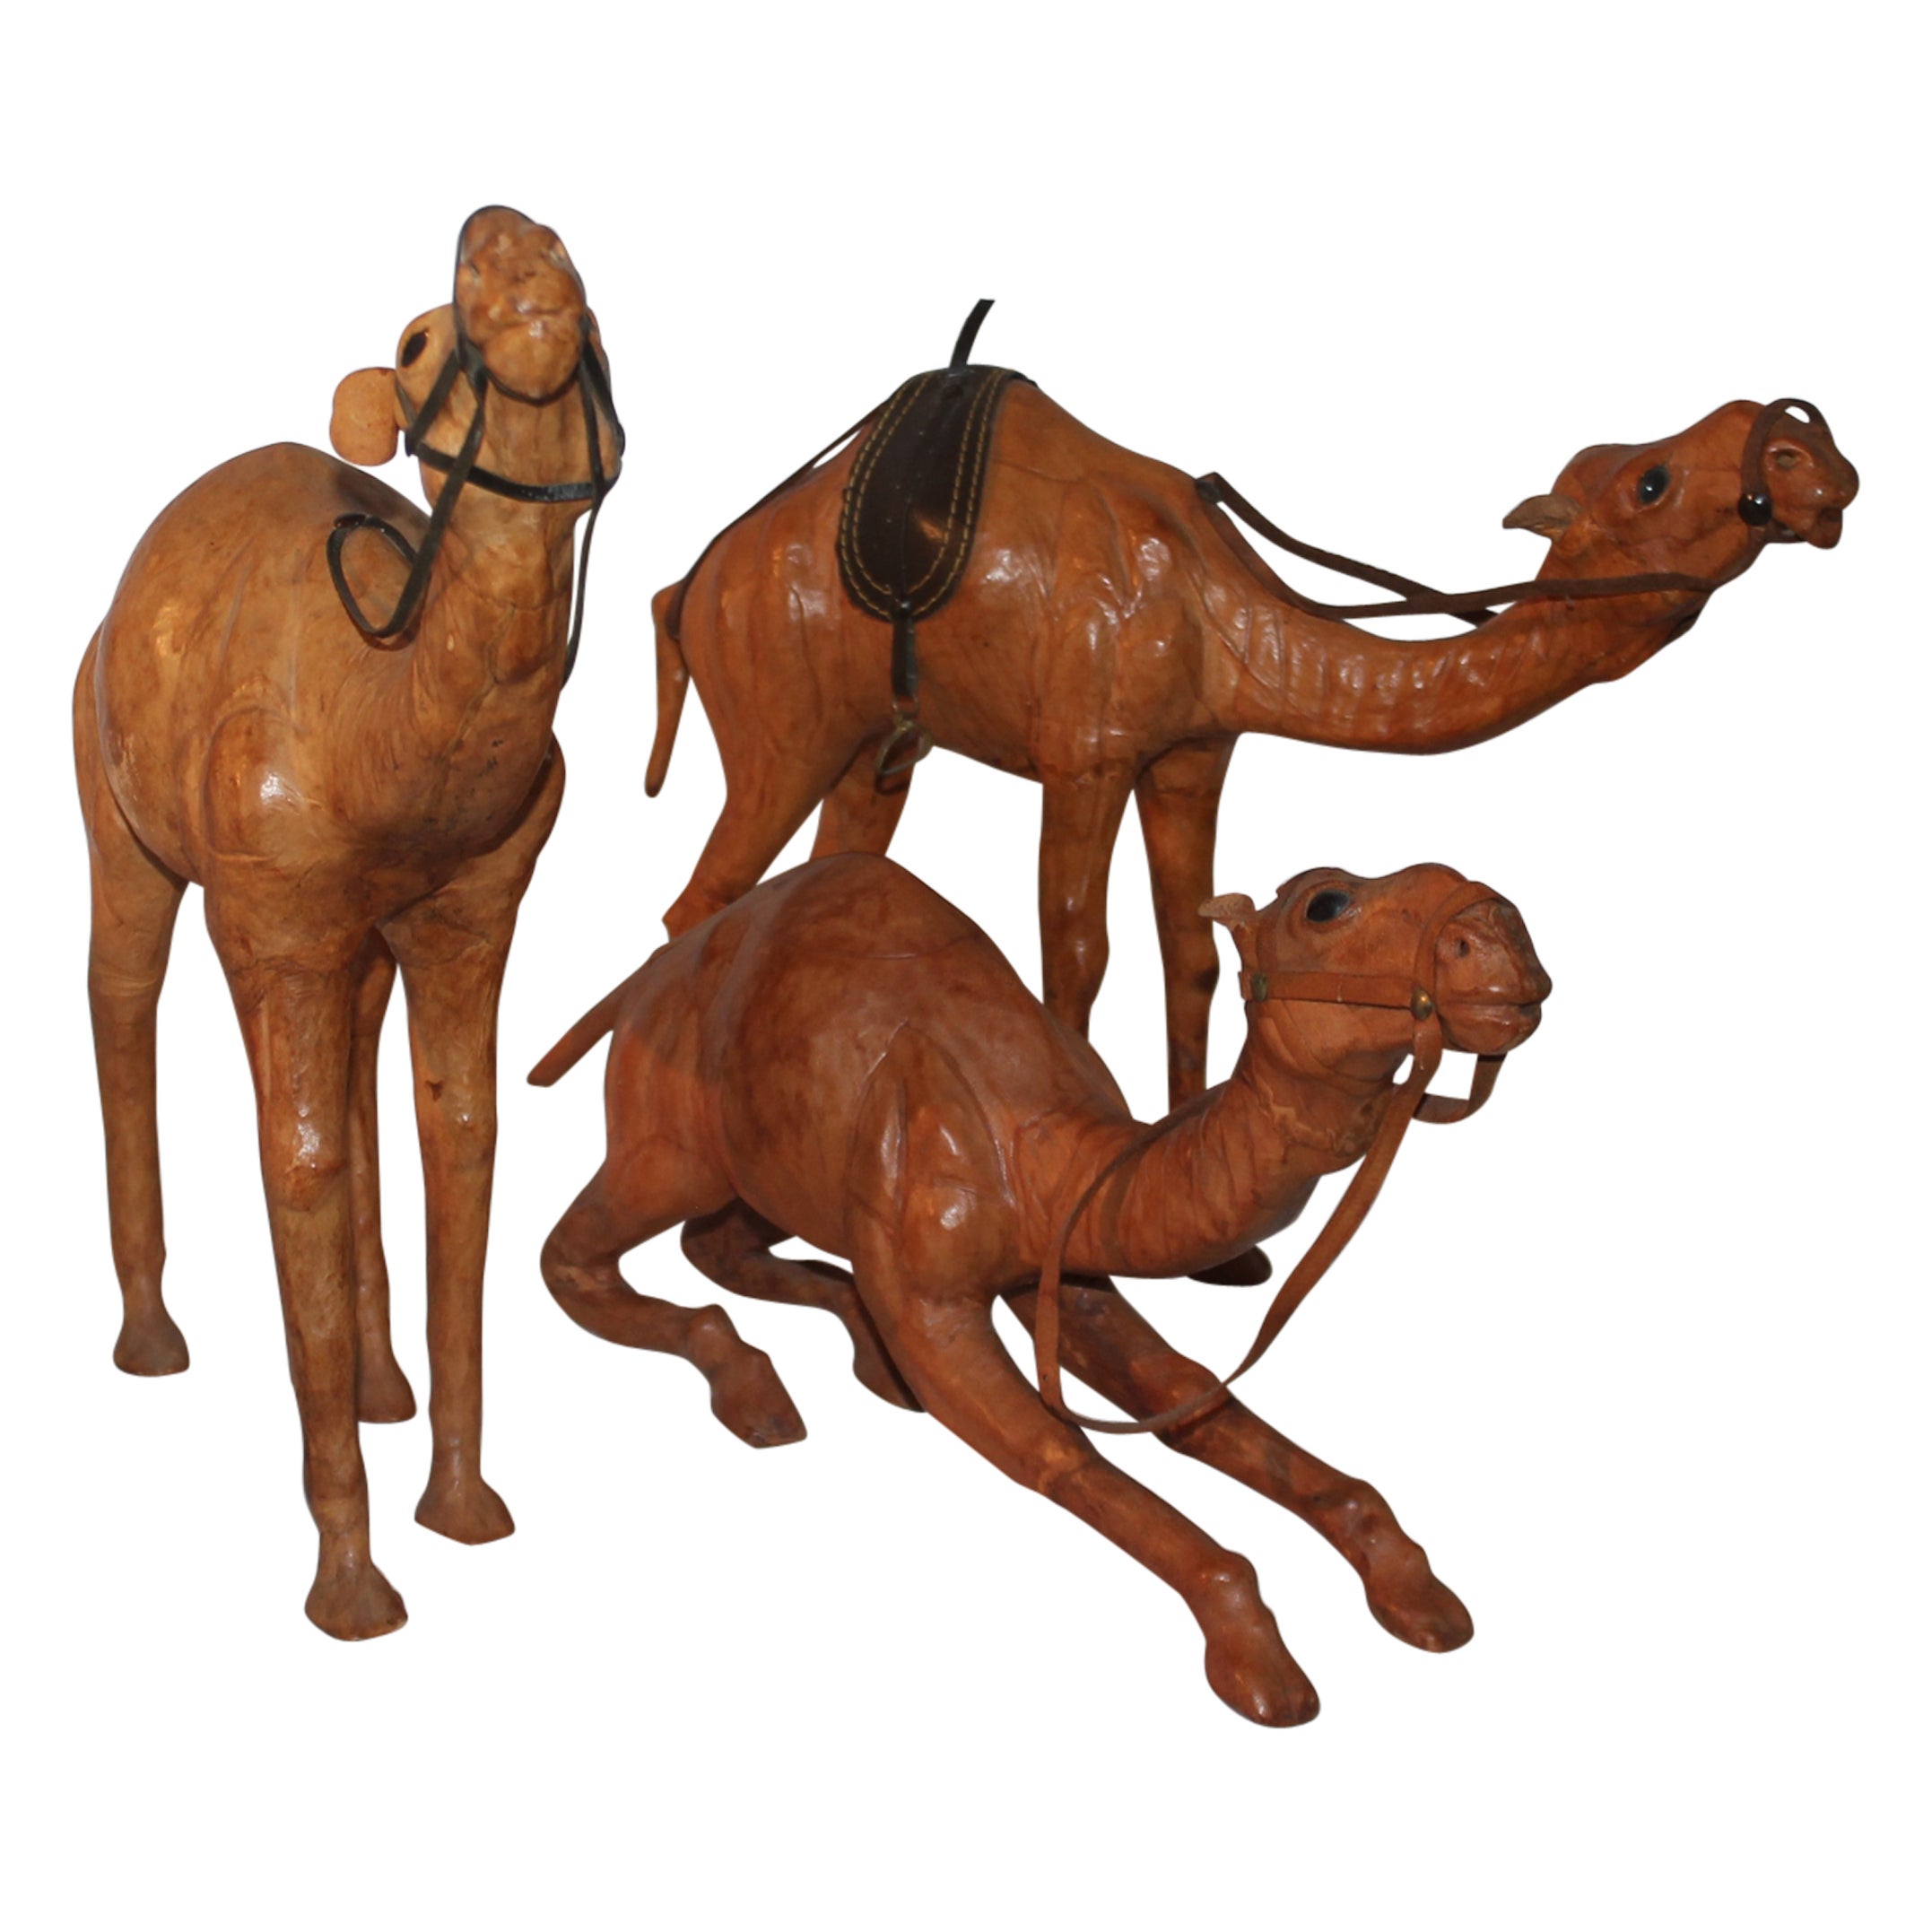 Collection of the Three Wise Men's Camels For Sale